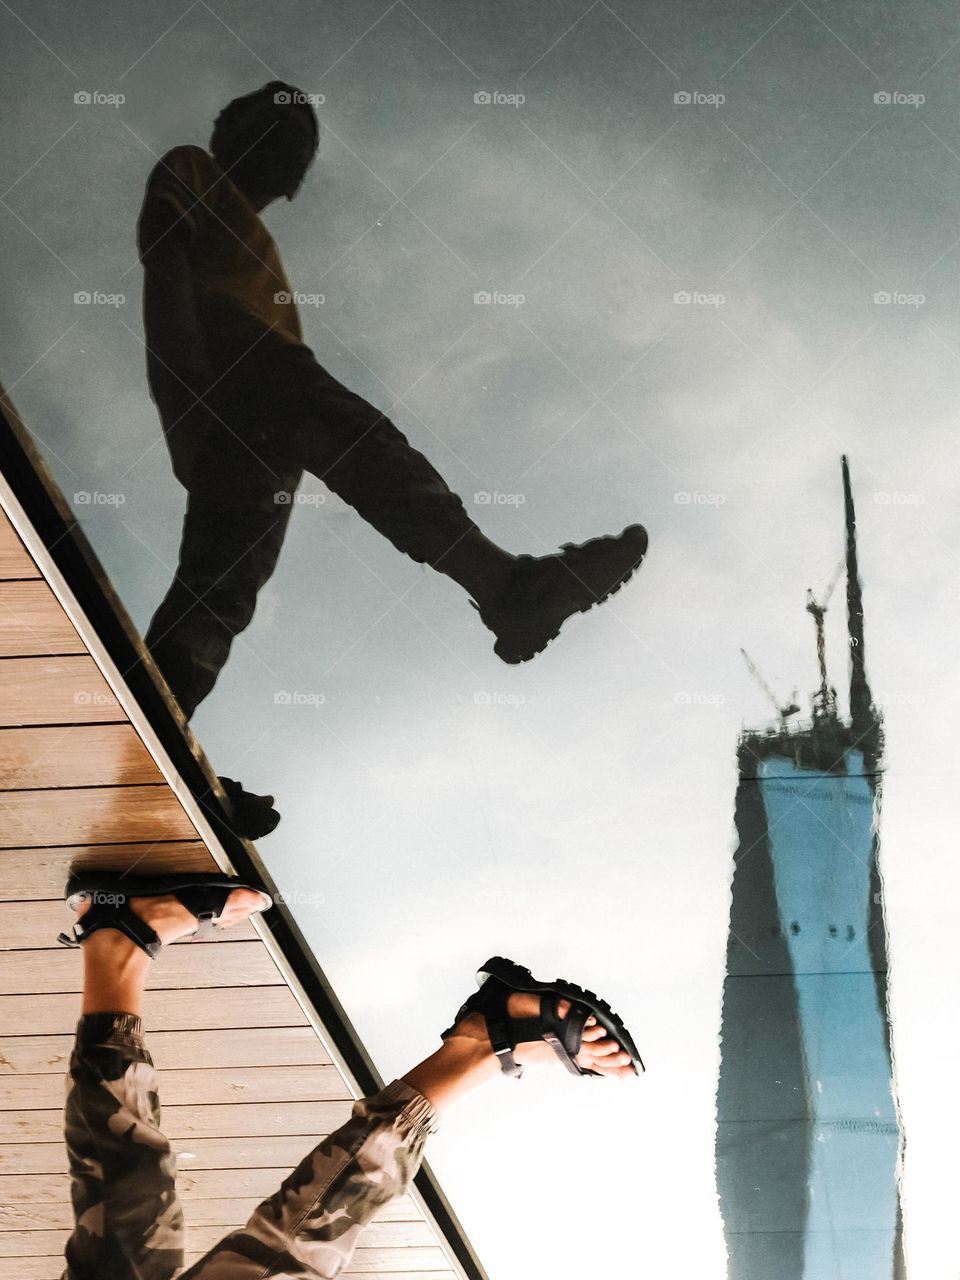 An upside down view of a man raising his feet above a calm pool of water with the world second tallest building in the background